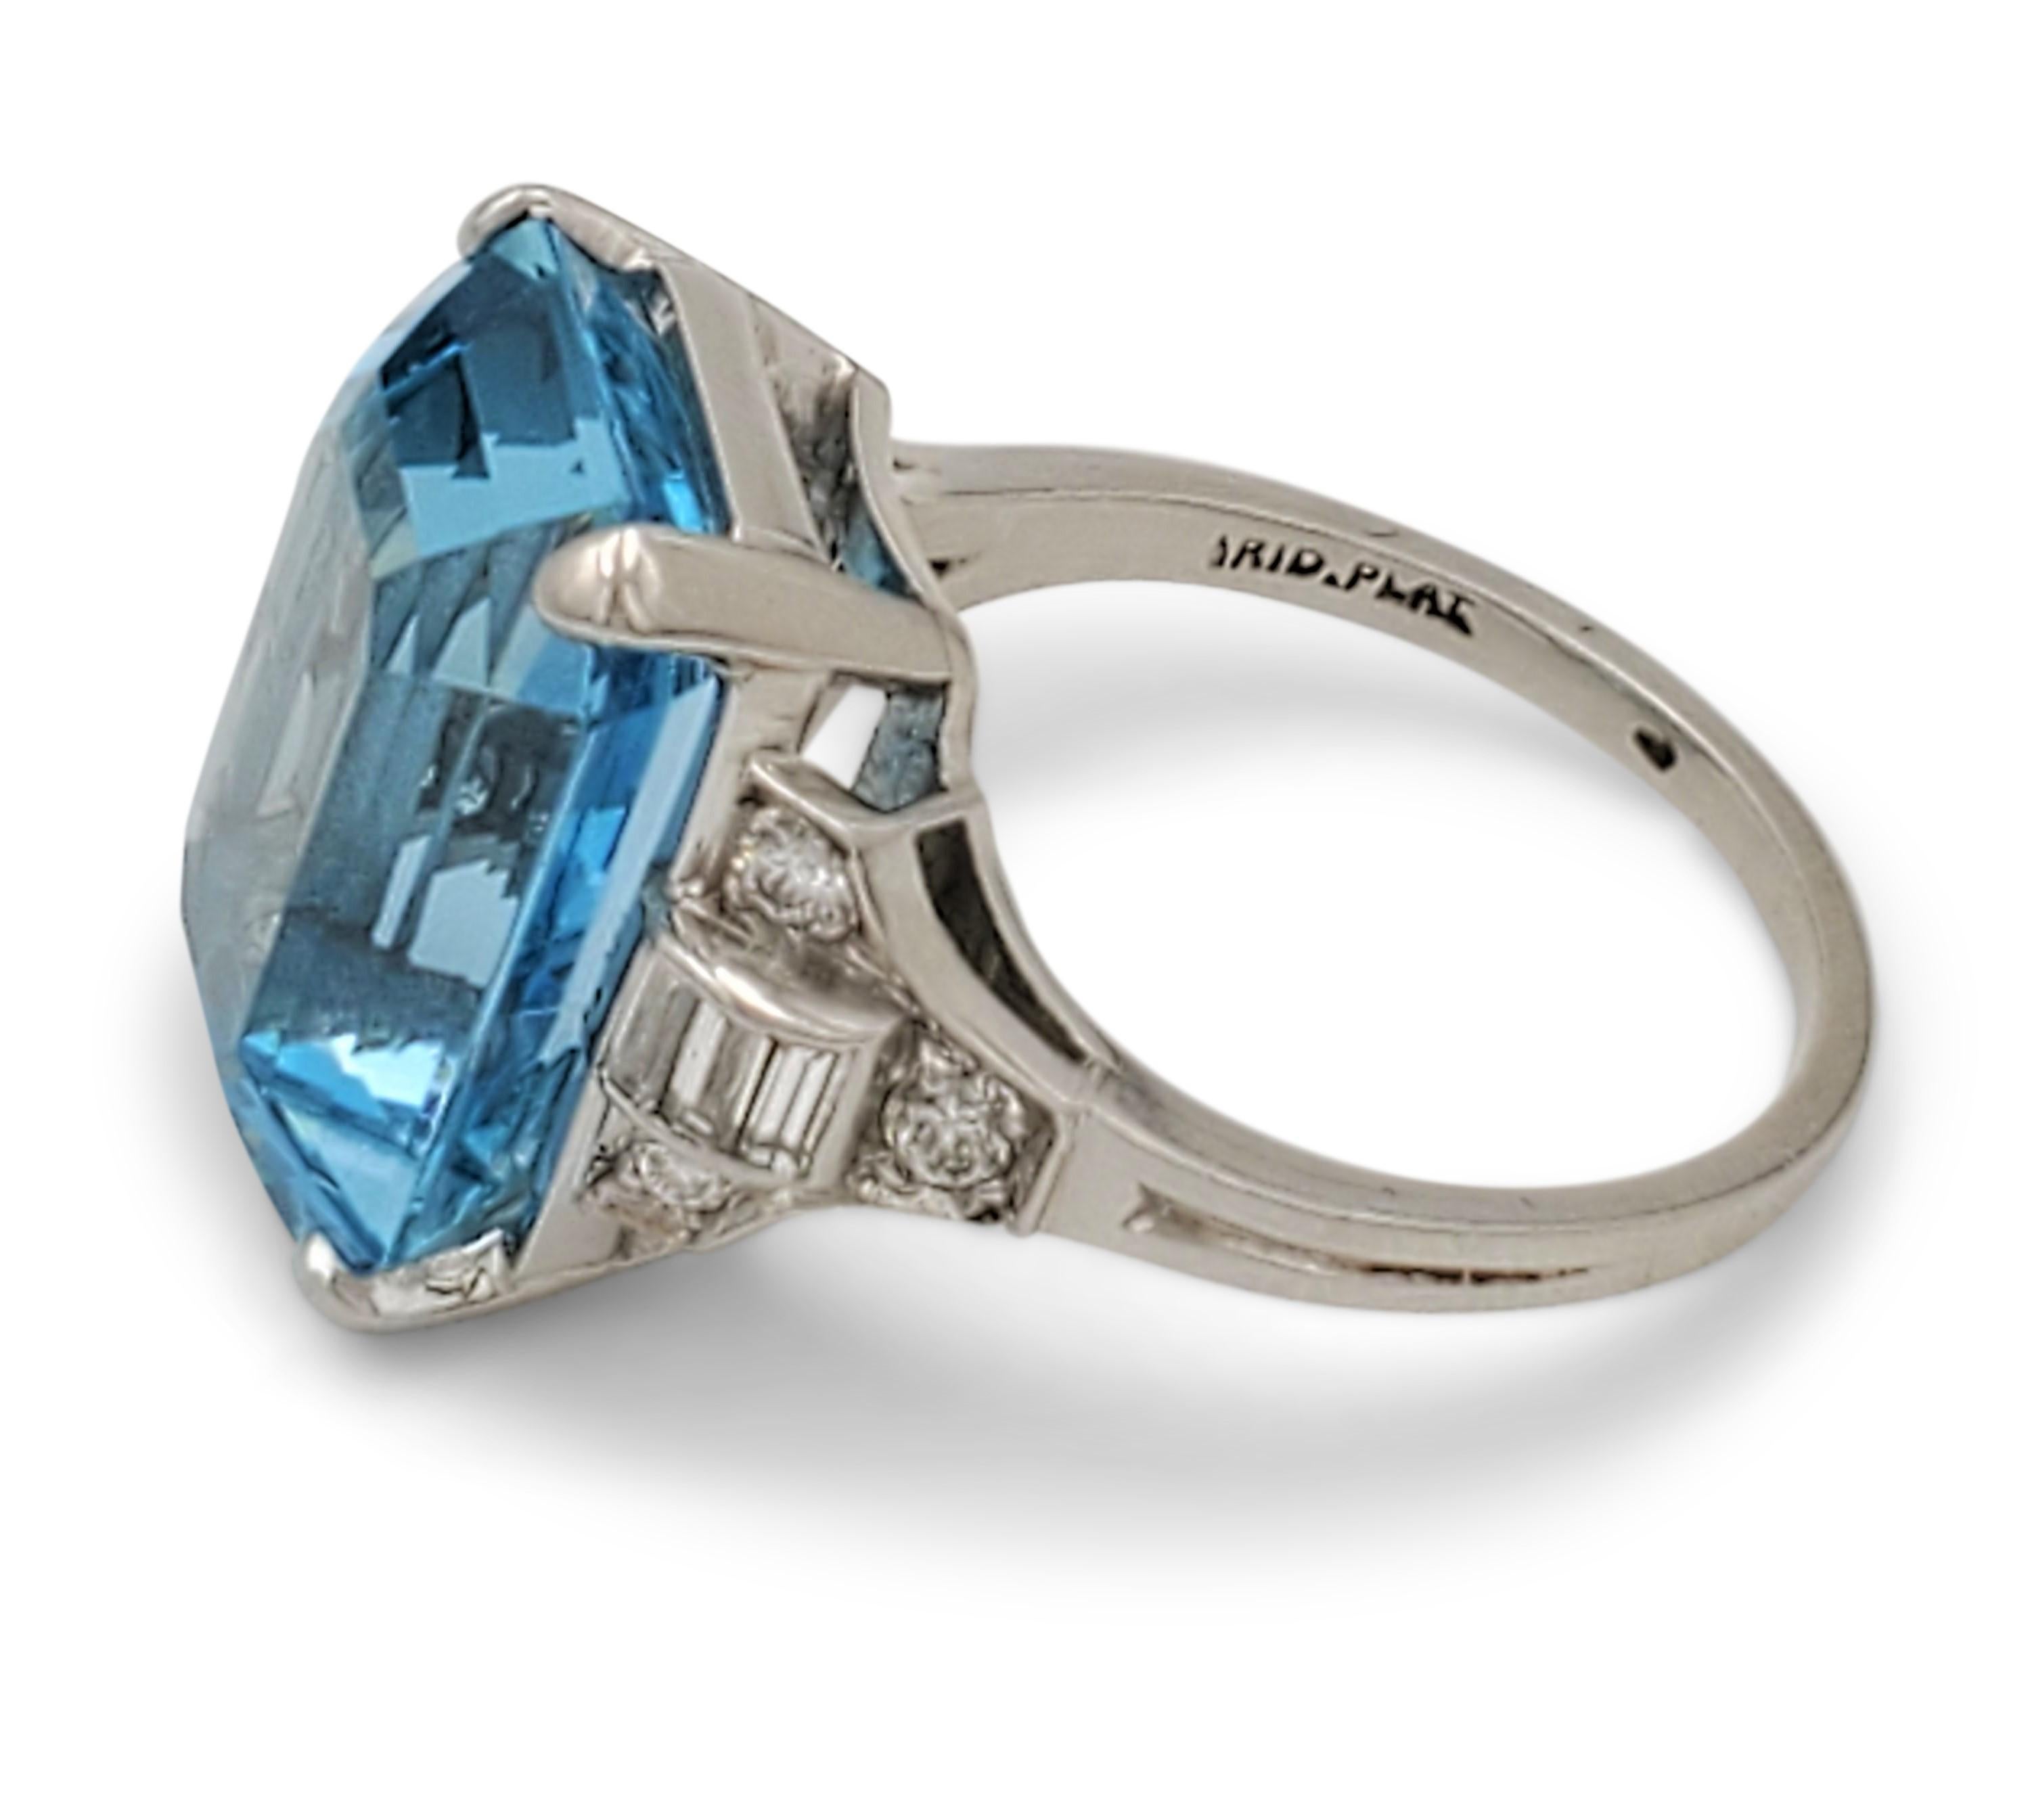 Charming Retro Tiffany & Co. aquamarine cocktail ring crafted in platinum. The aquamarine stone measures an estimated 9.10 carats (15.5 mm x 11.6 mm x 7.4 mm) and is flanked by round and baguette-cut diamonds of high quality weighing approximately